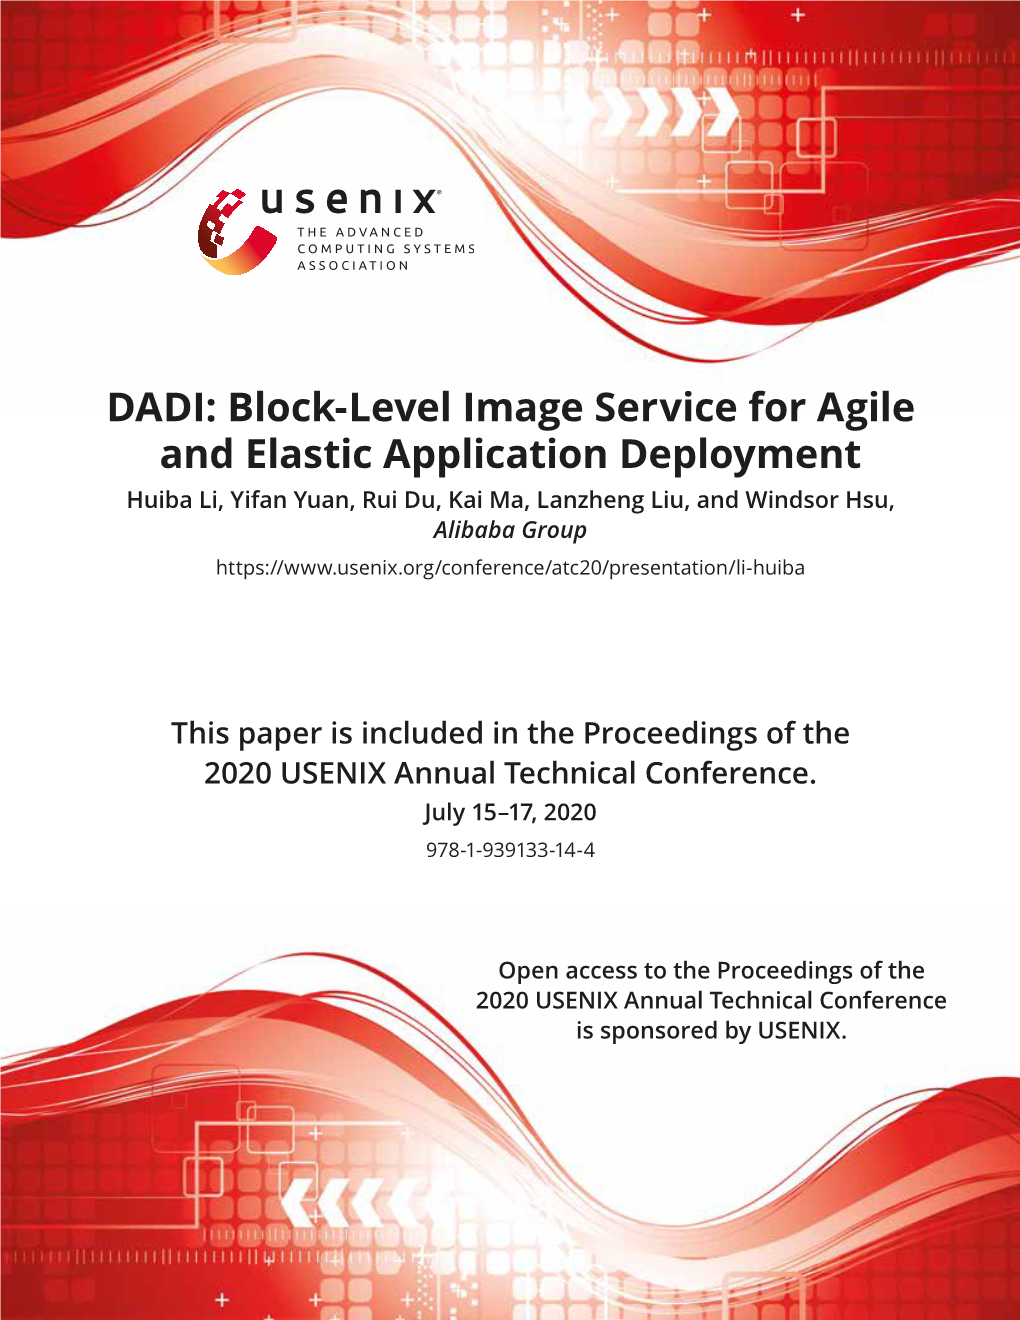 DADI: Block-Level Image Service for Agile and Elastic Application Deployment